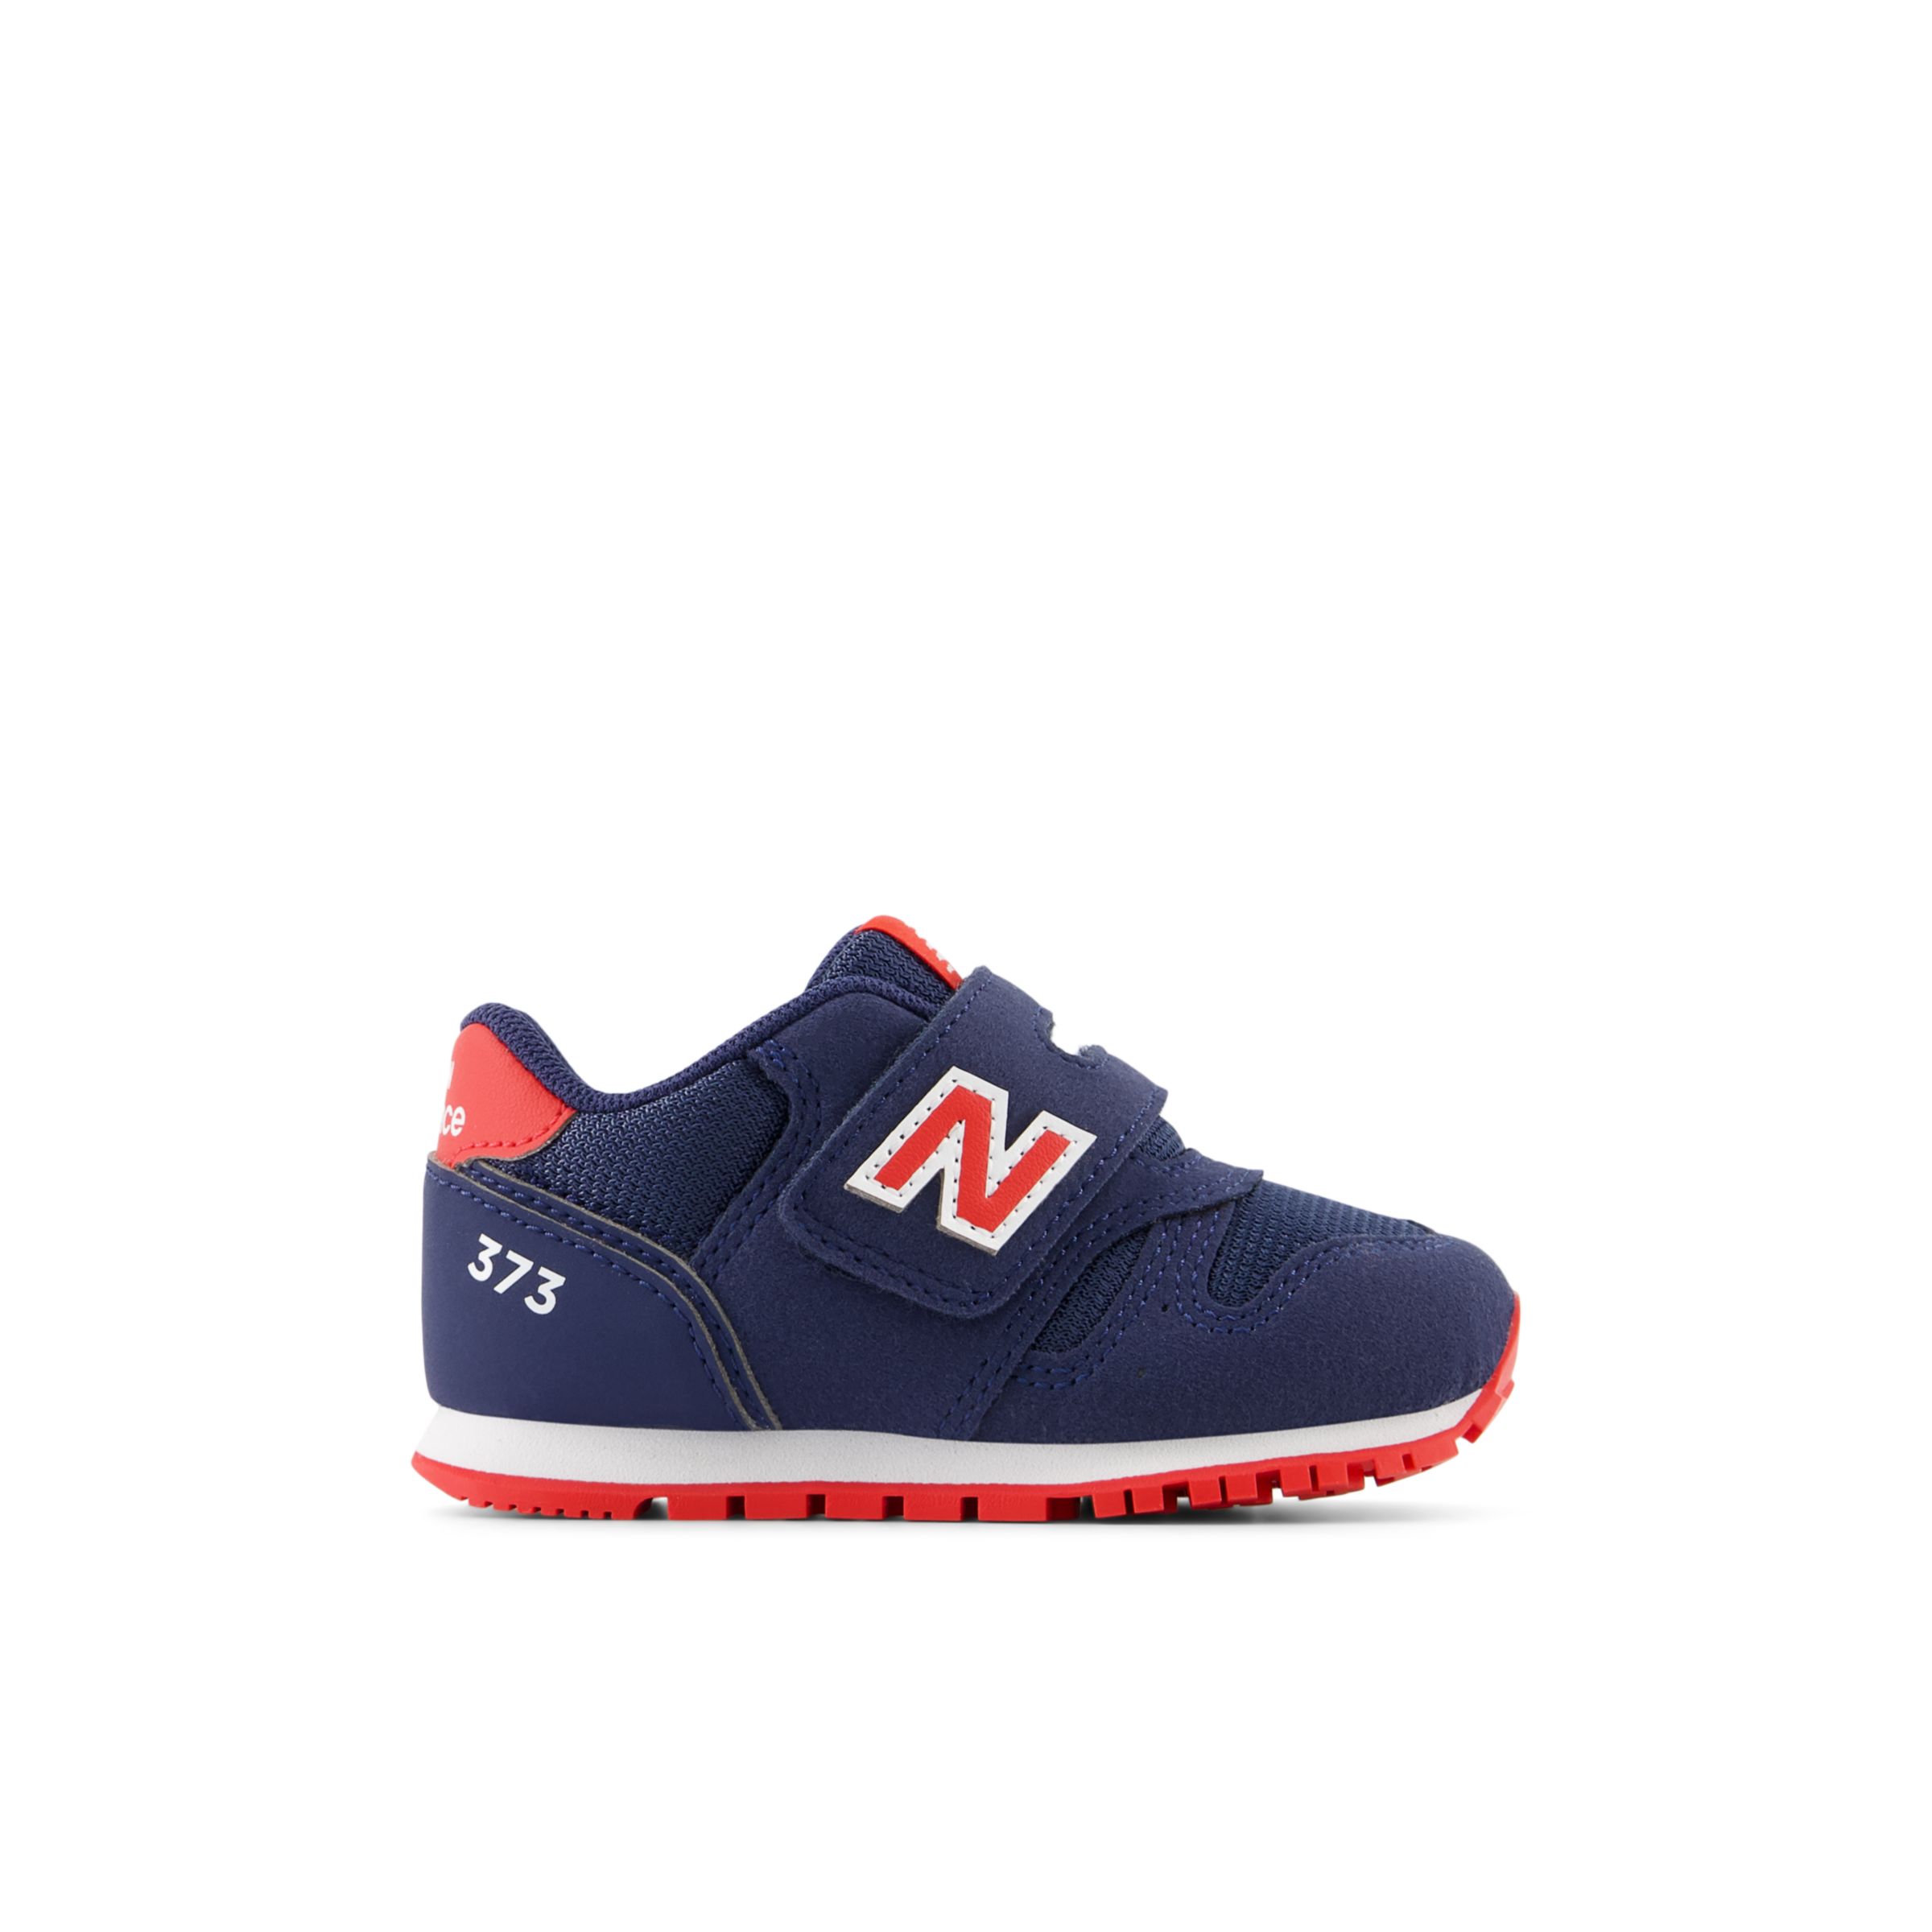 New Balance Kids' 373 Hook and Loop en Bleu/Rouge, Synthetic, Taille 27.5